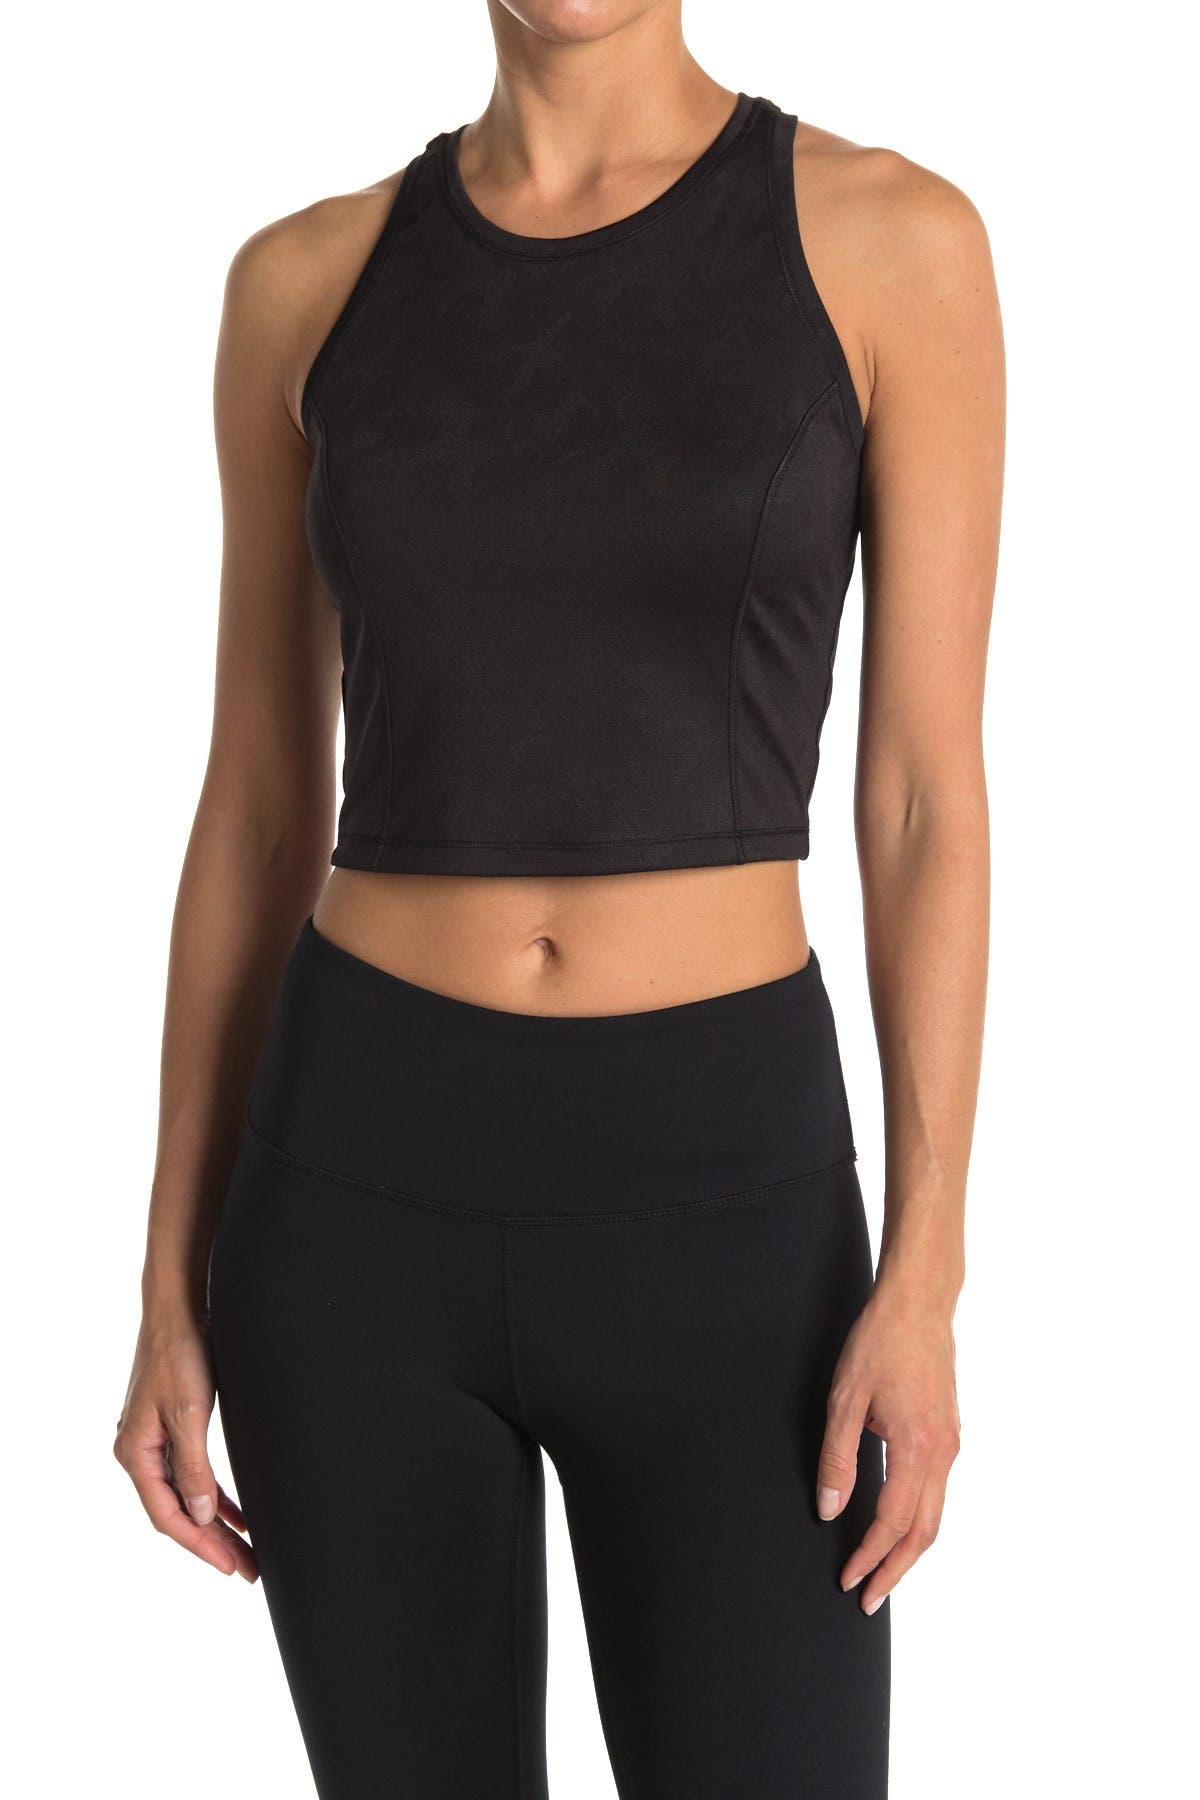 90 Degree By Reflex Camo Jacquard Racerback Crop Top In Charcoal